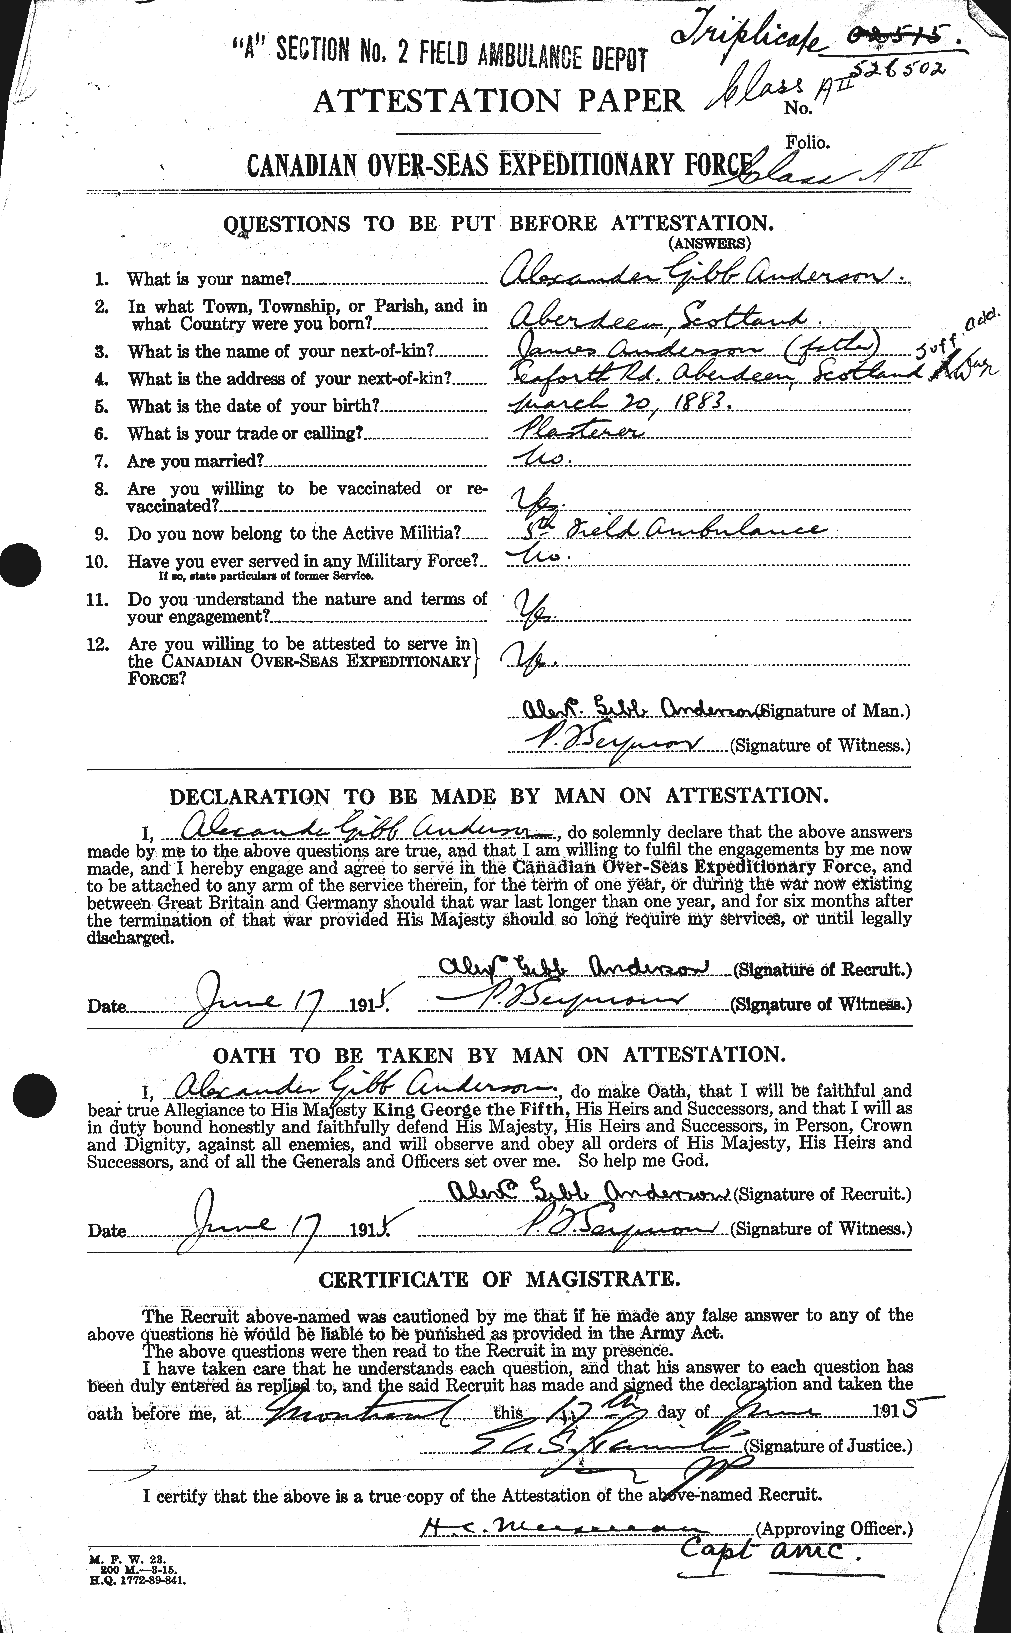 Personnel Records of the First World War - CEF 209490a